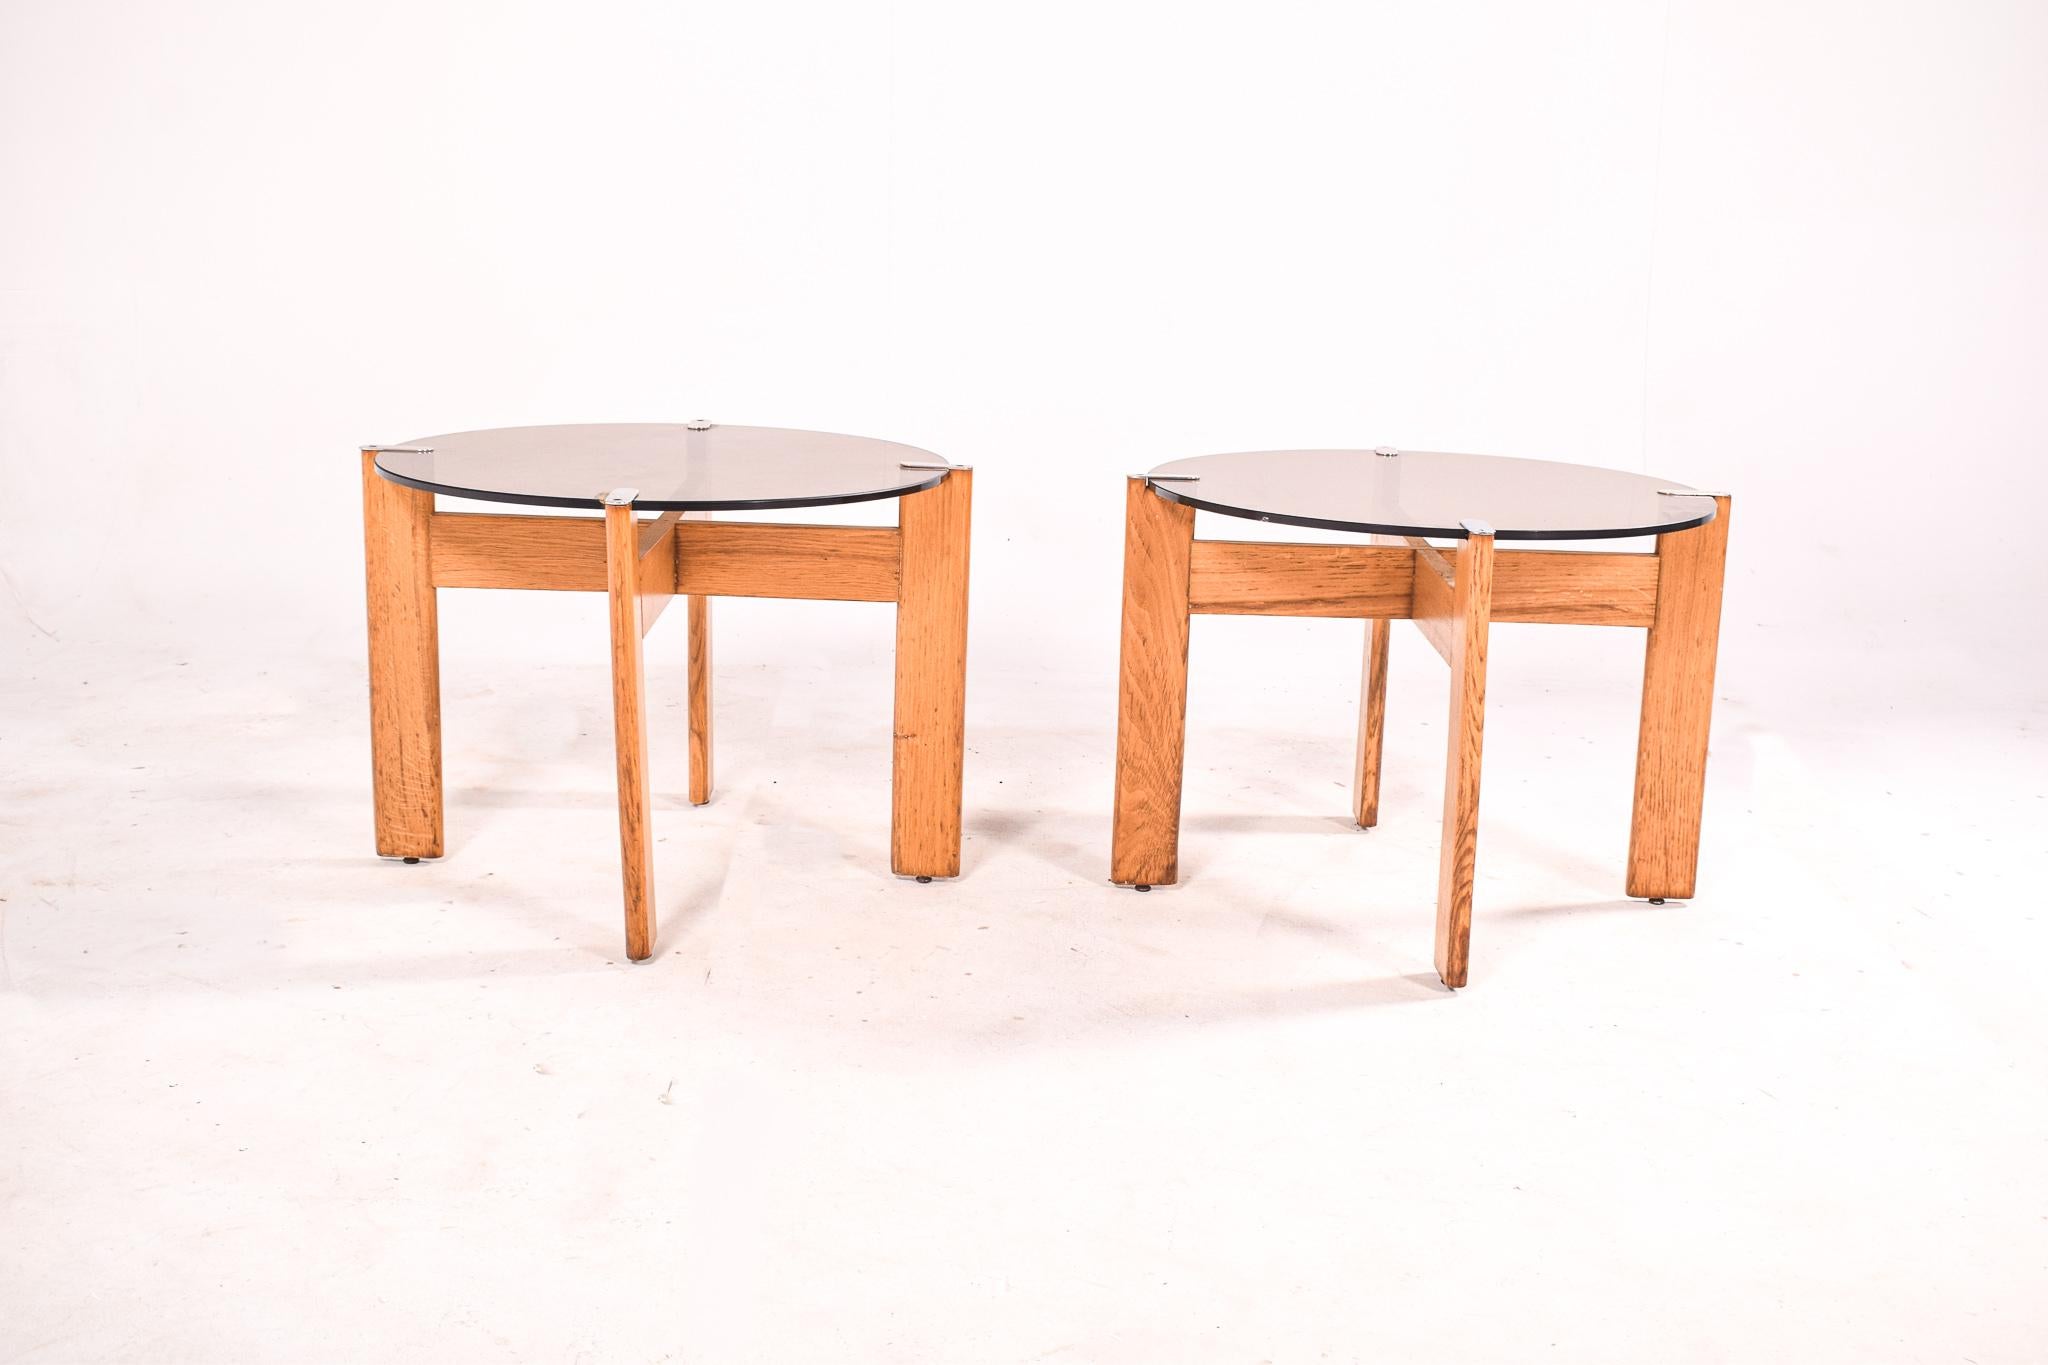 This pair of Portuguese side tables from the 1980s exemplifies the sleek and functional aesthetic that marked the design trends of the decade. Constructed from oak wood, the tables boast a natural, inviting grain that lends warmth and character to